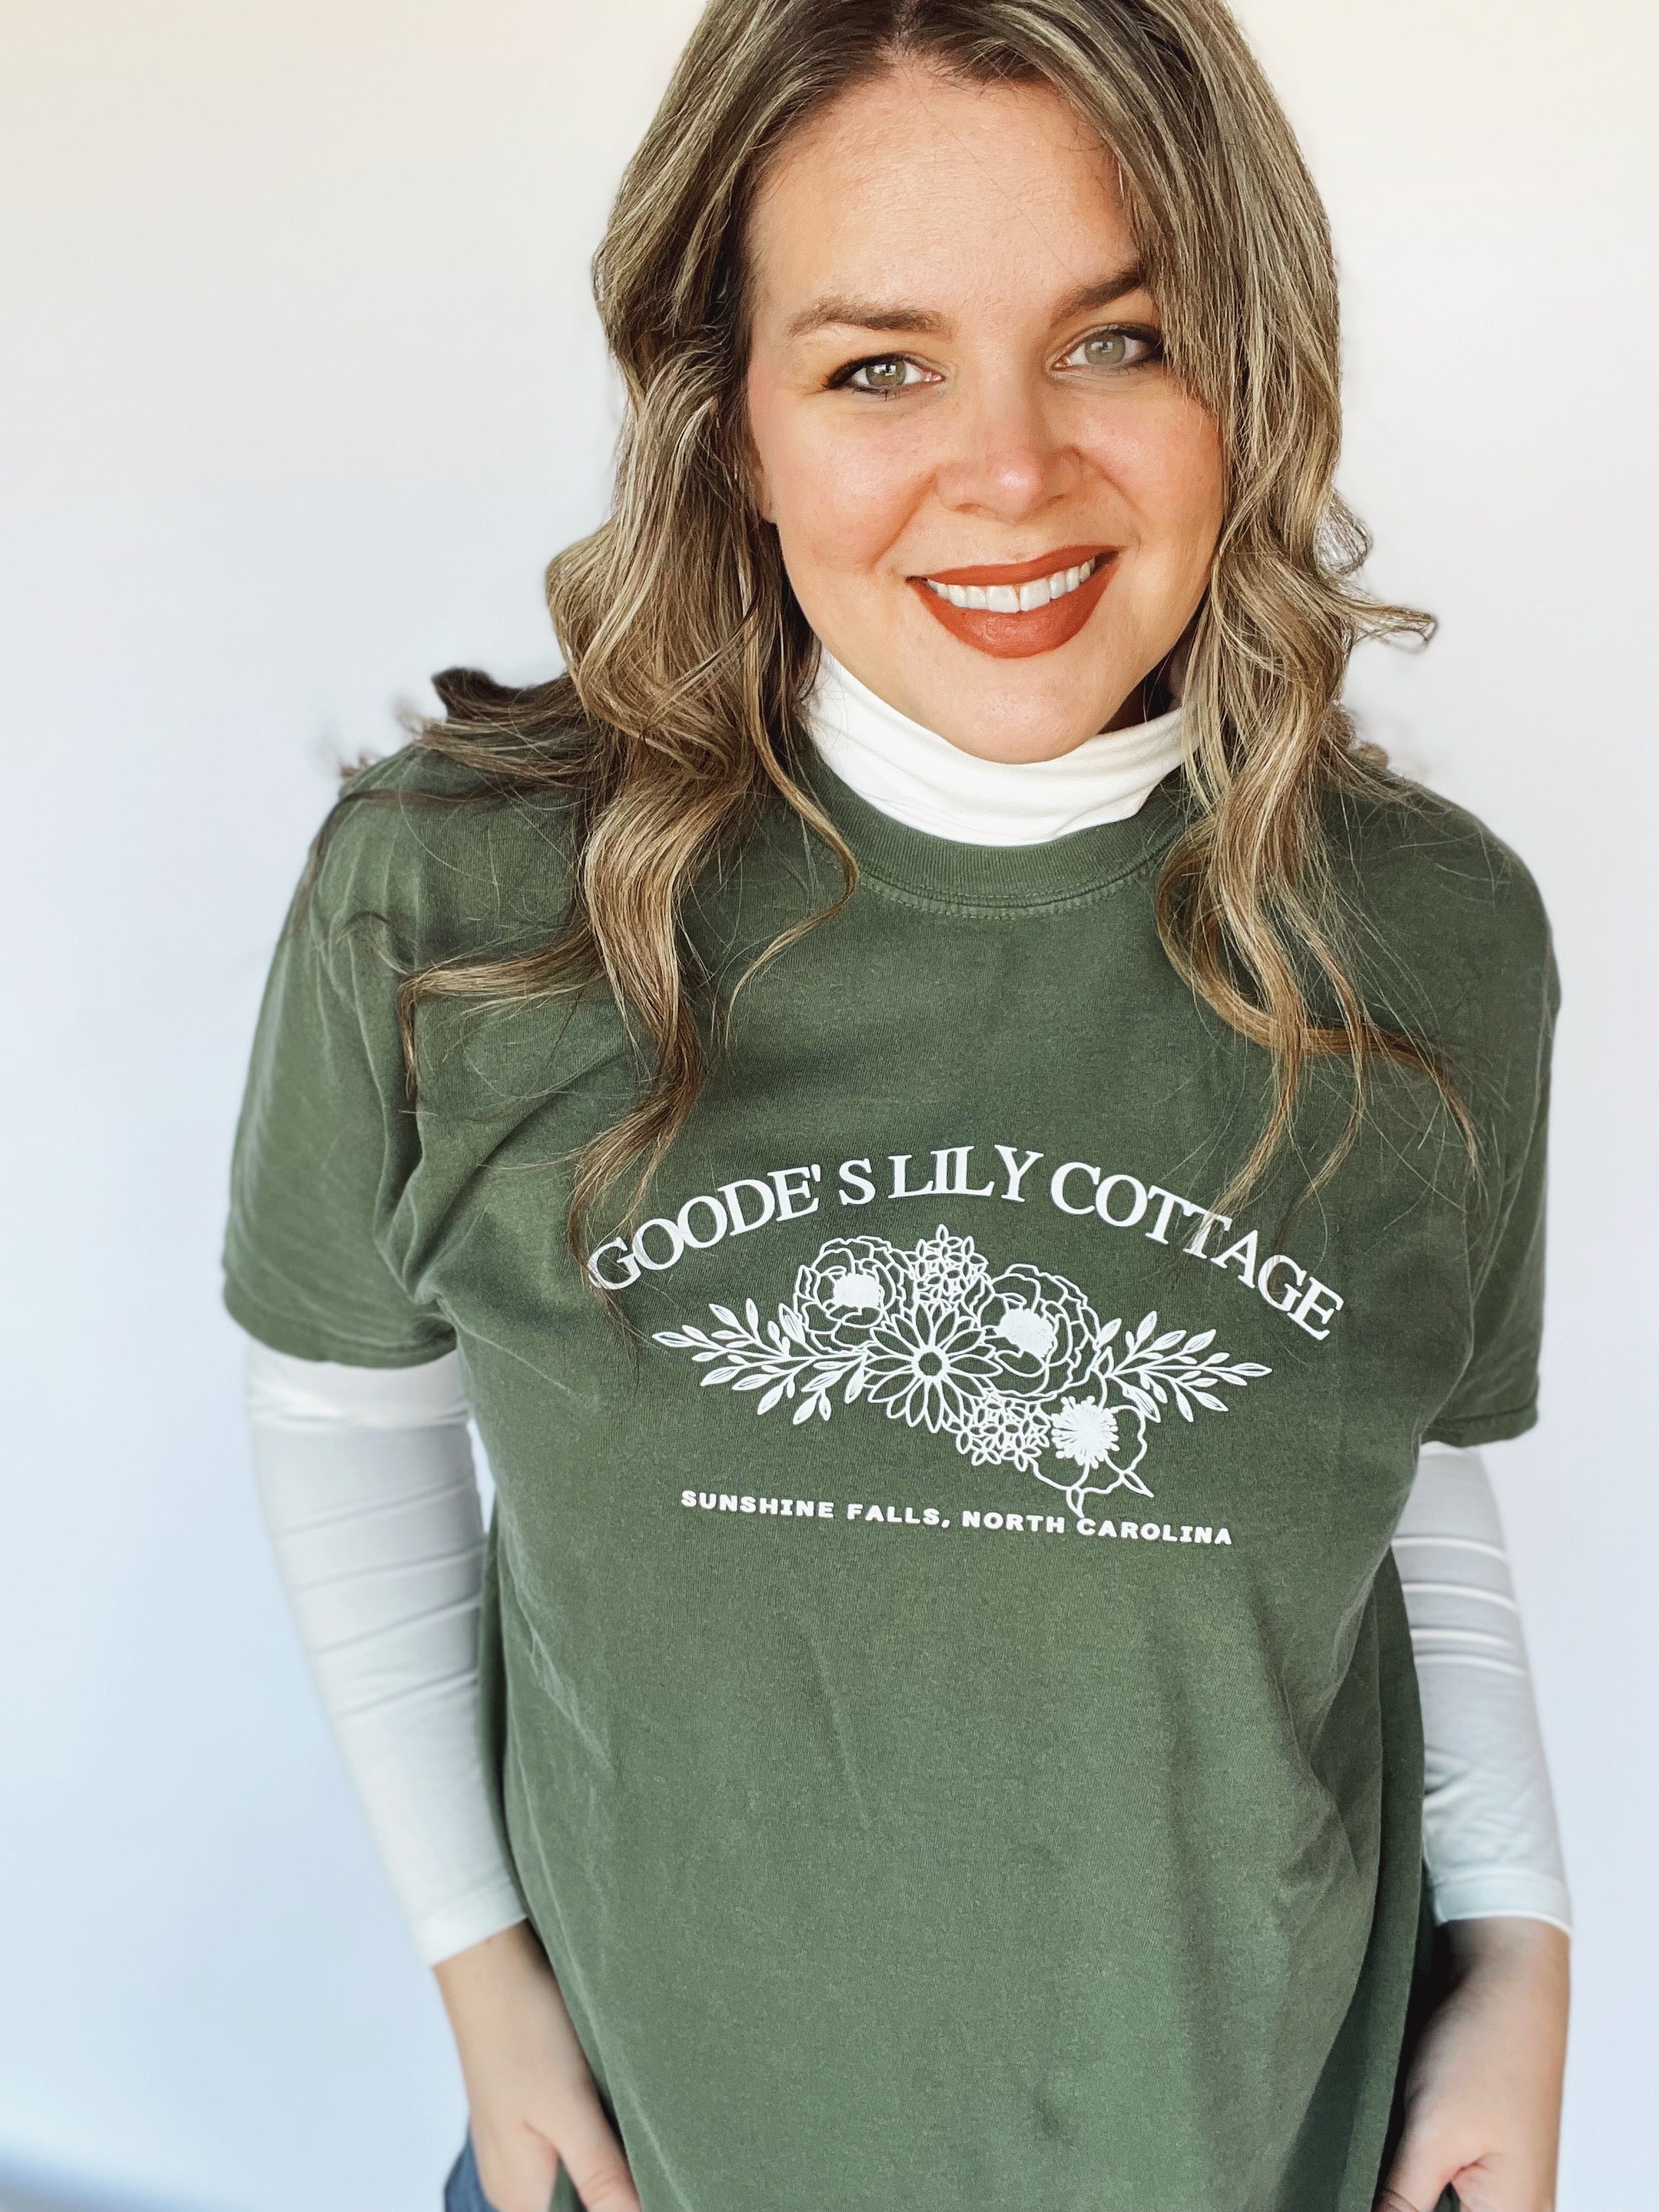 Goode's Lily Cottage Tee